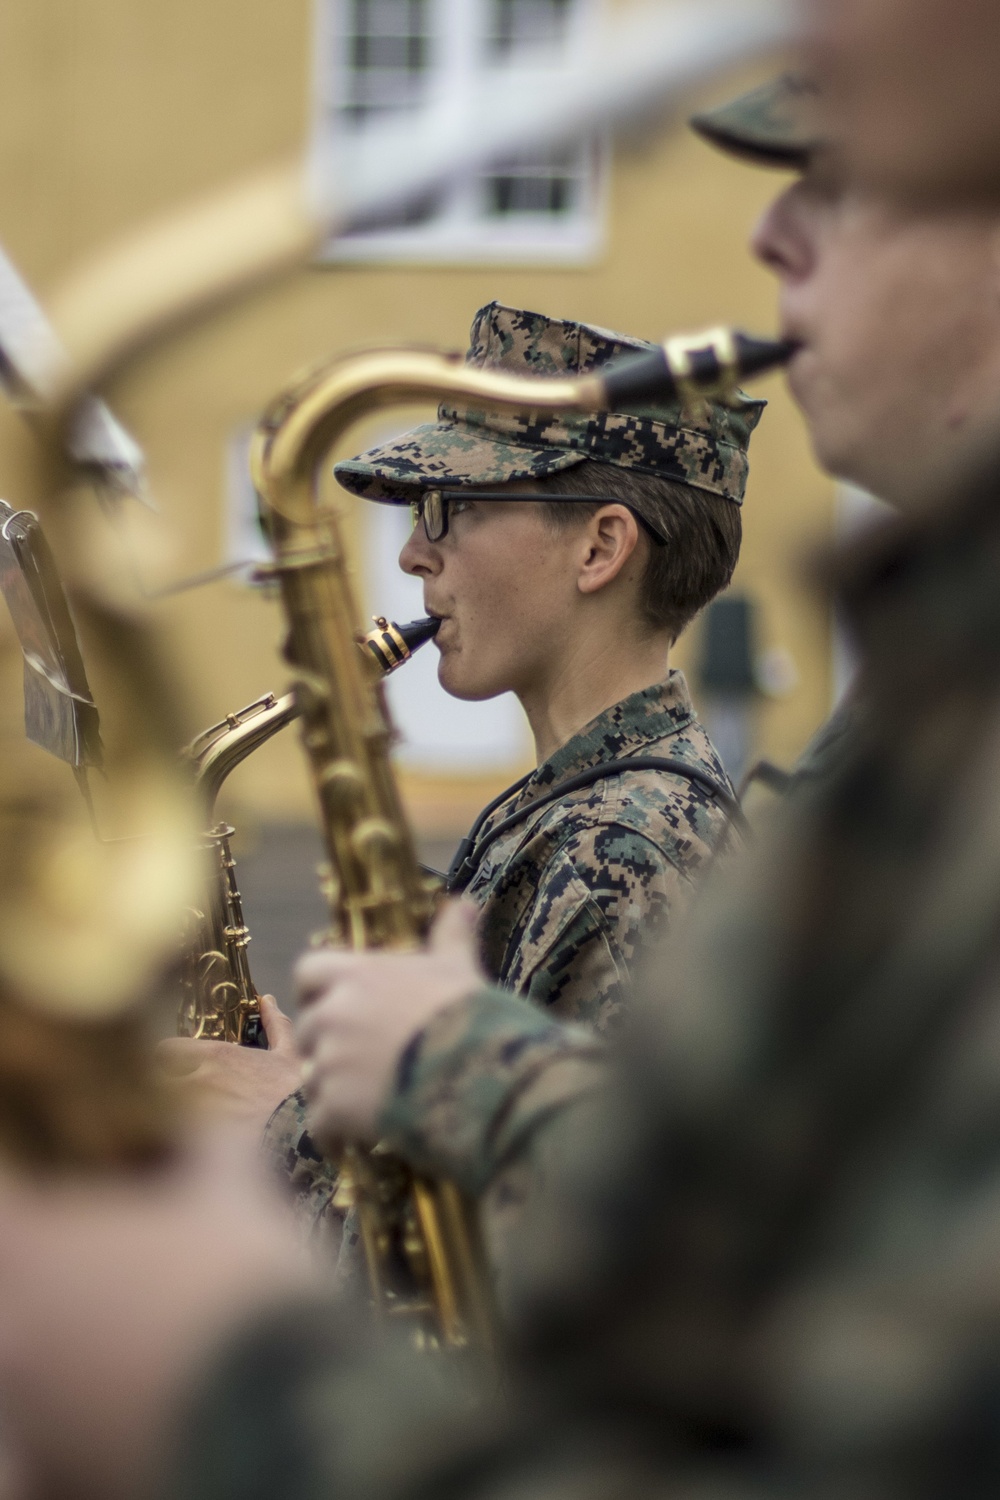 Defining Worth through Music and the Marine Corps